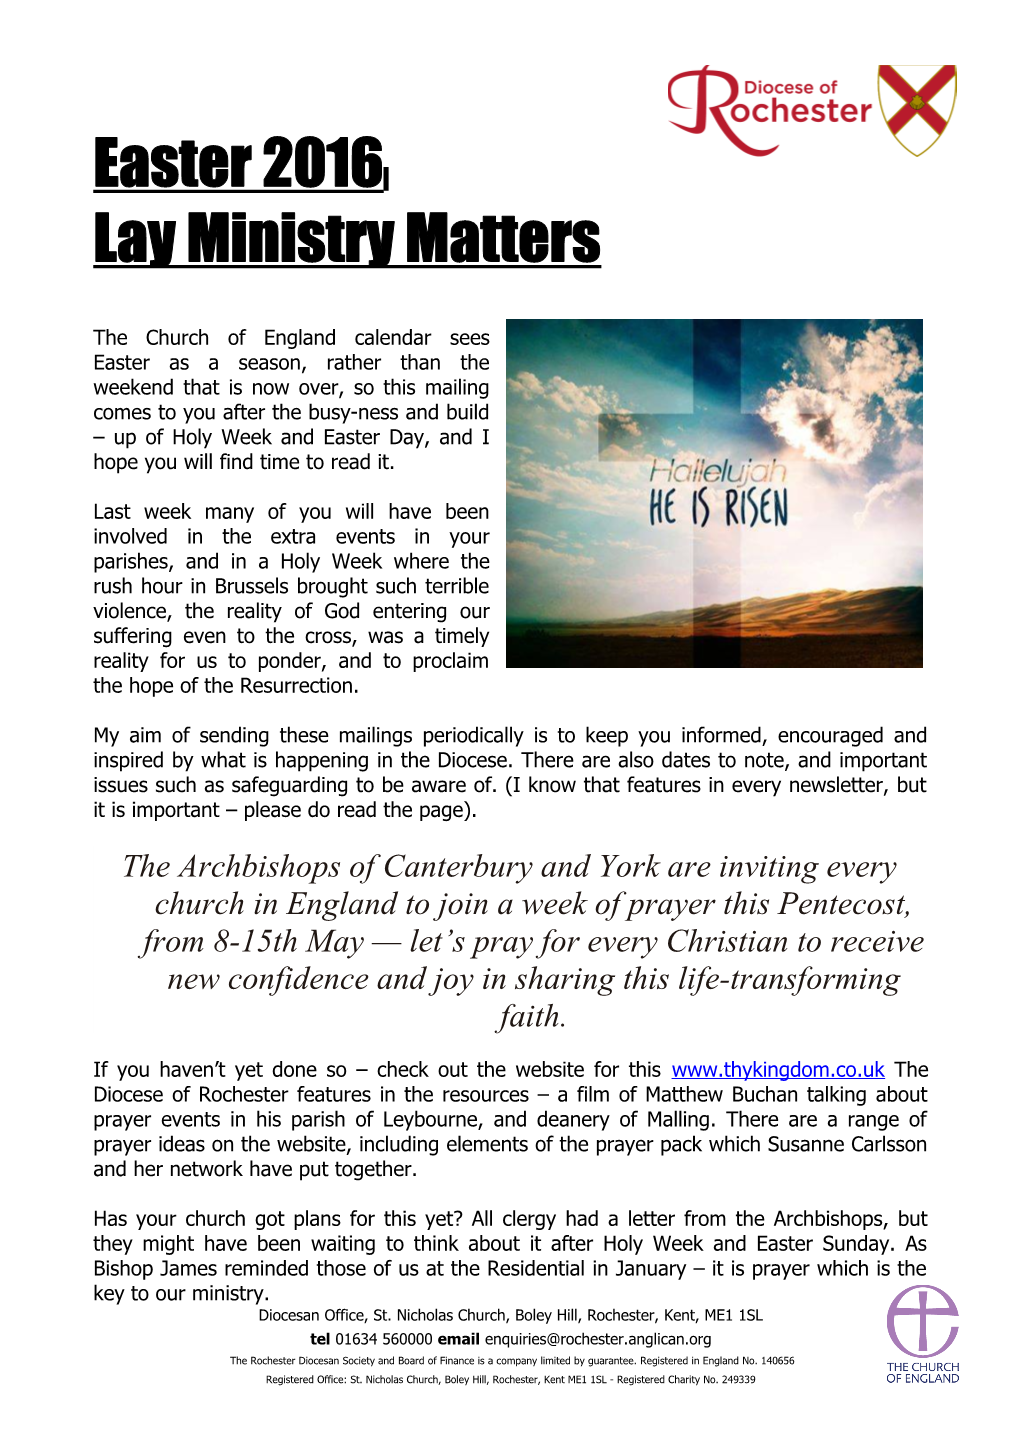 Lay Ministry Matters